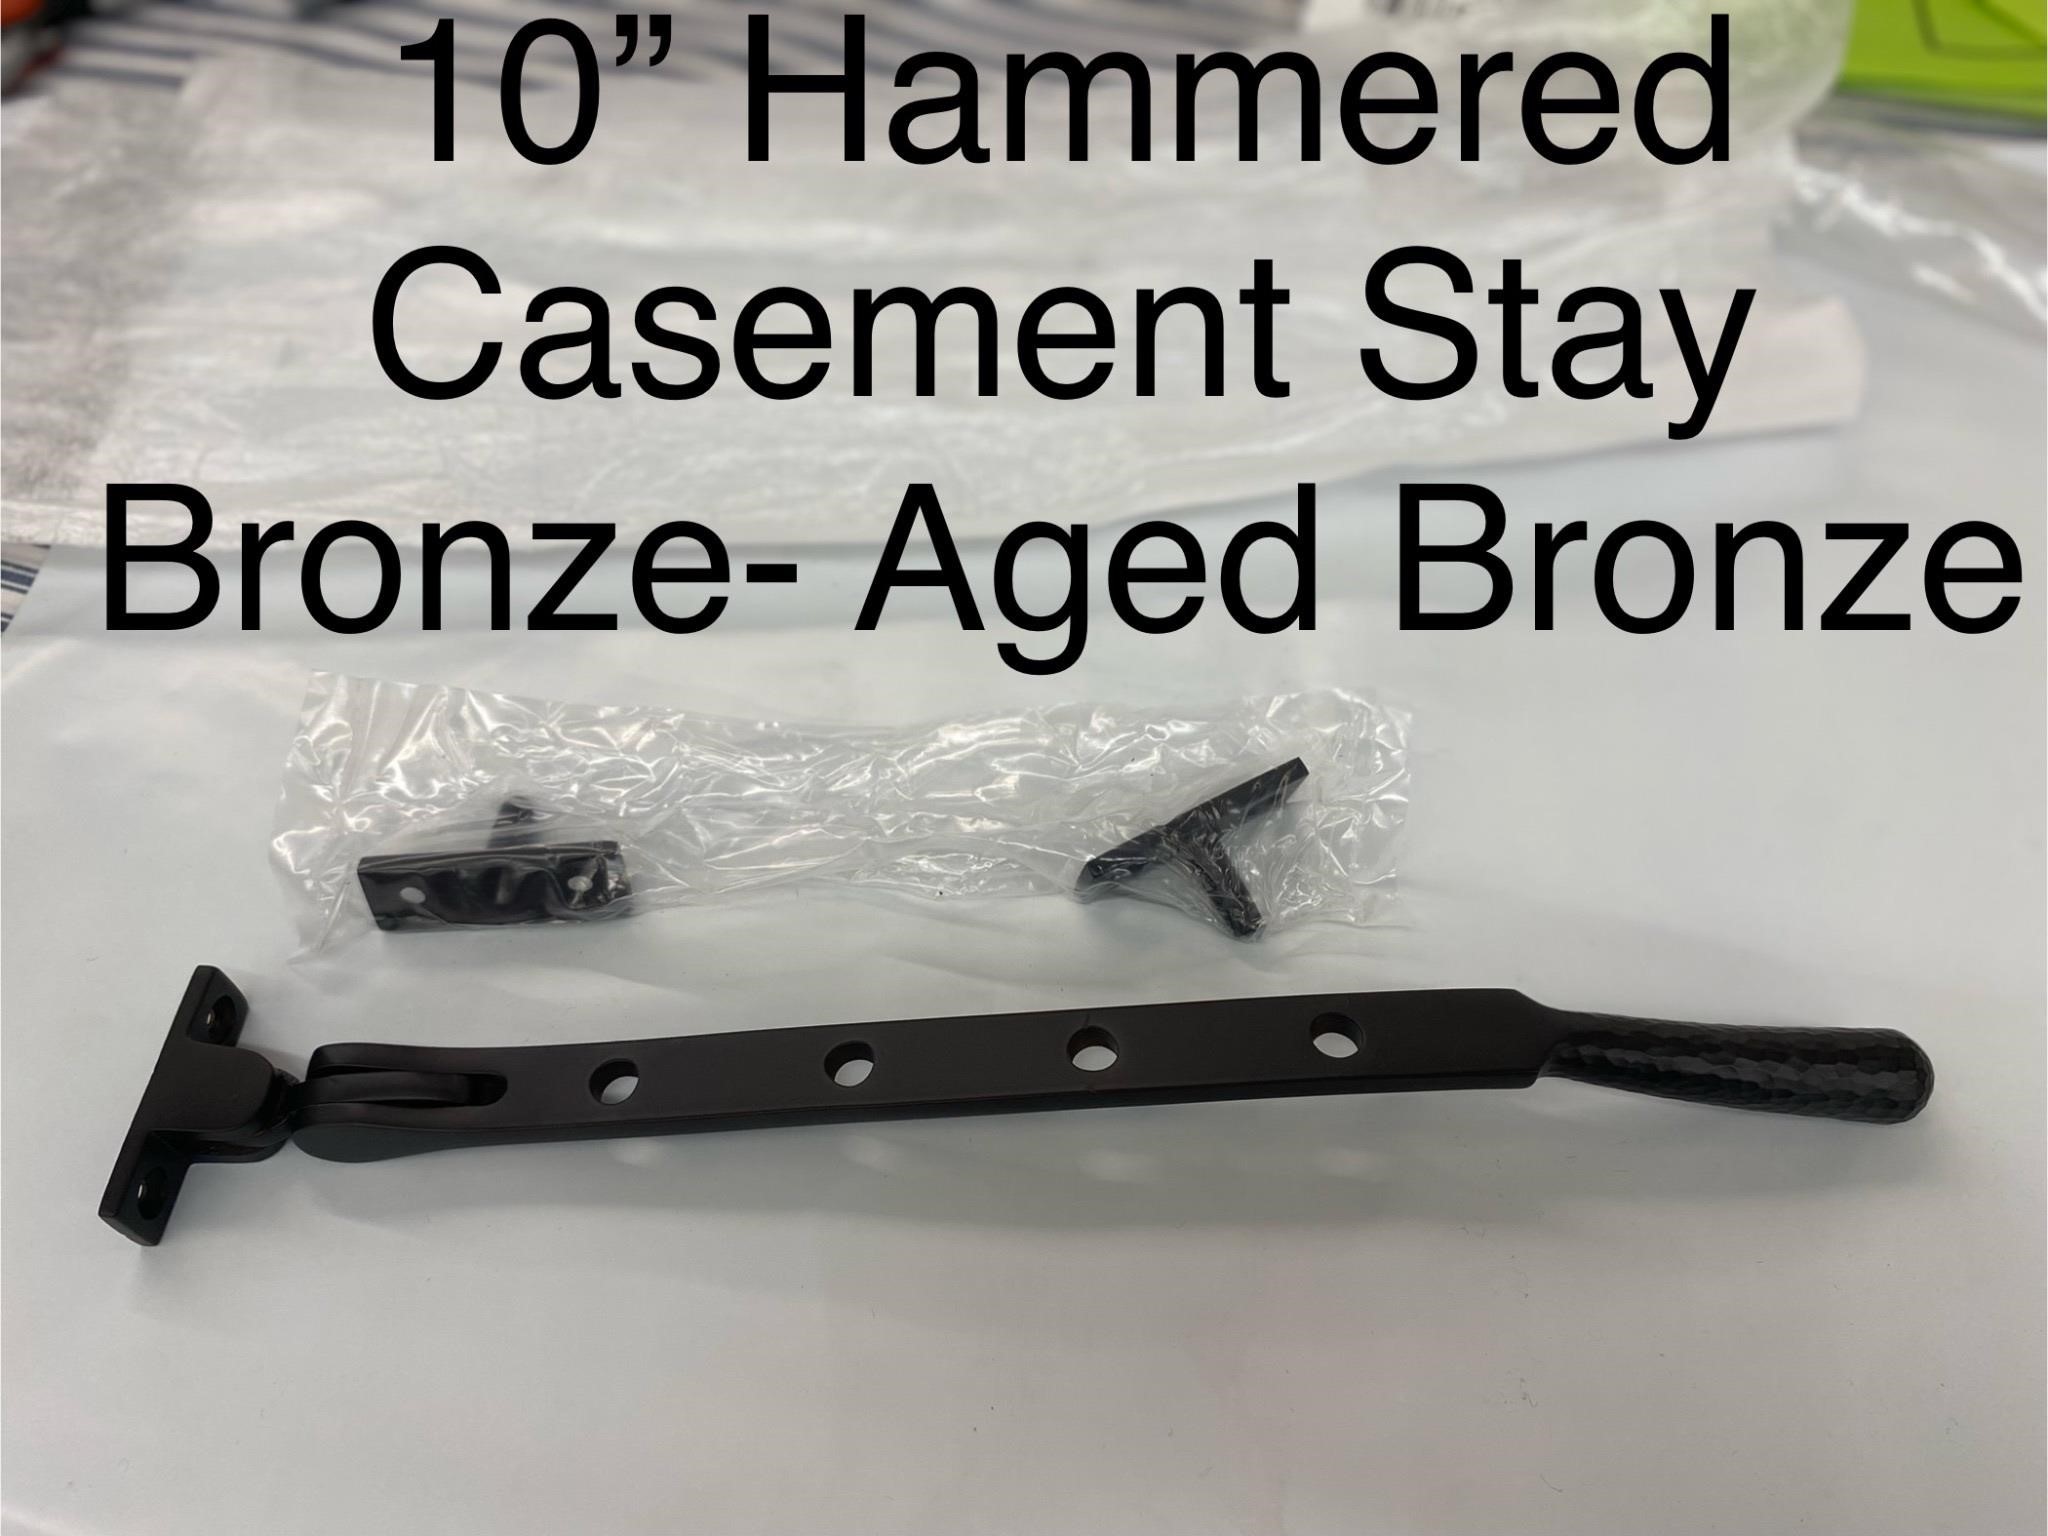 Lot of 4 10” Hammered Casement Stay- Aged Bronze